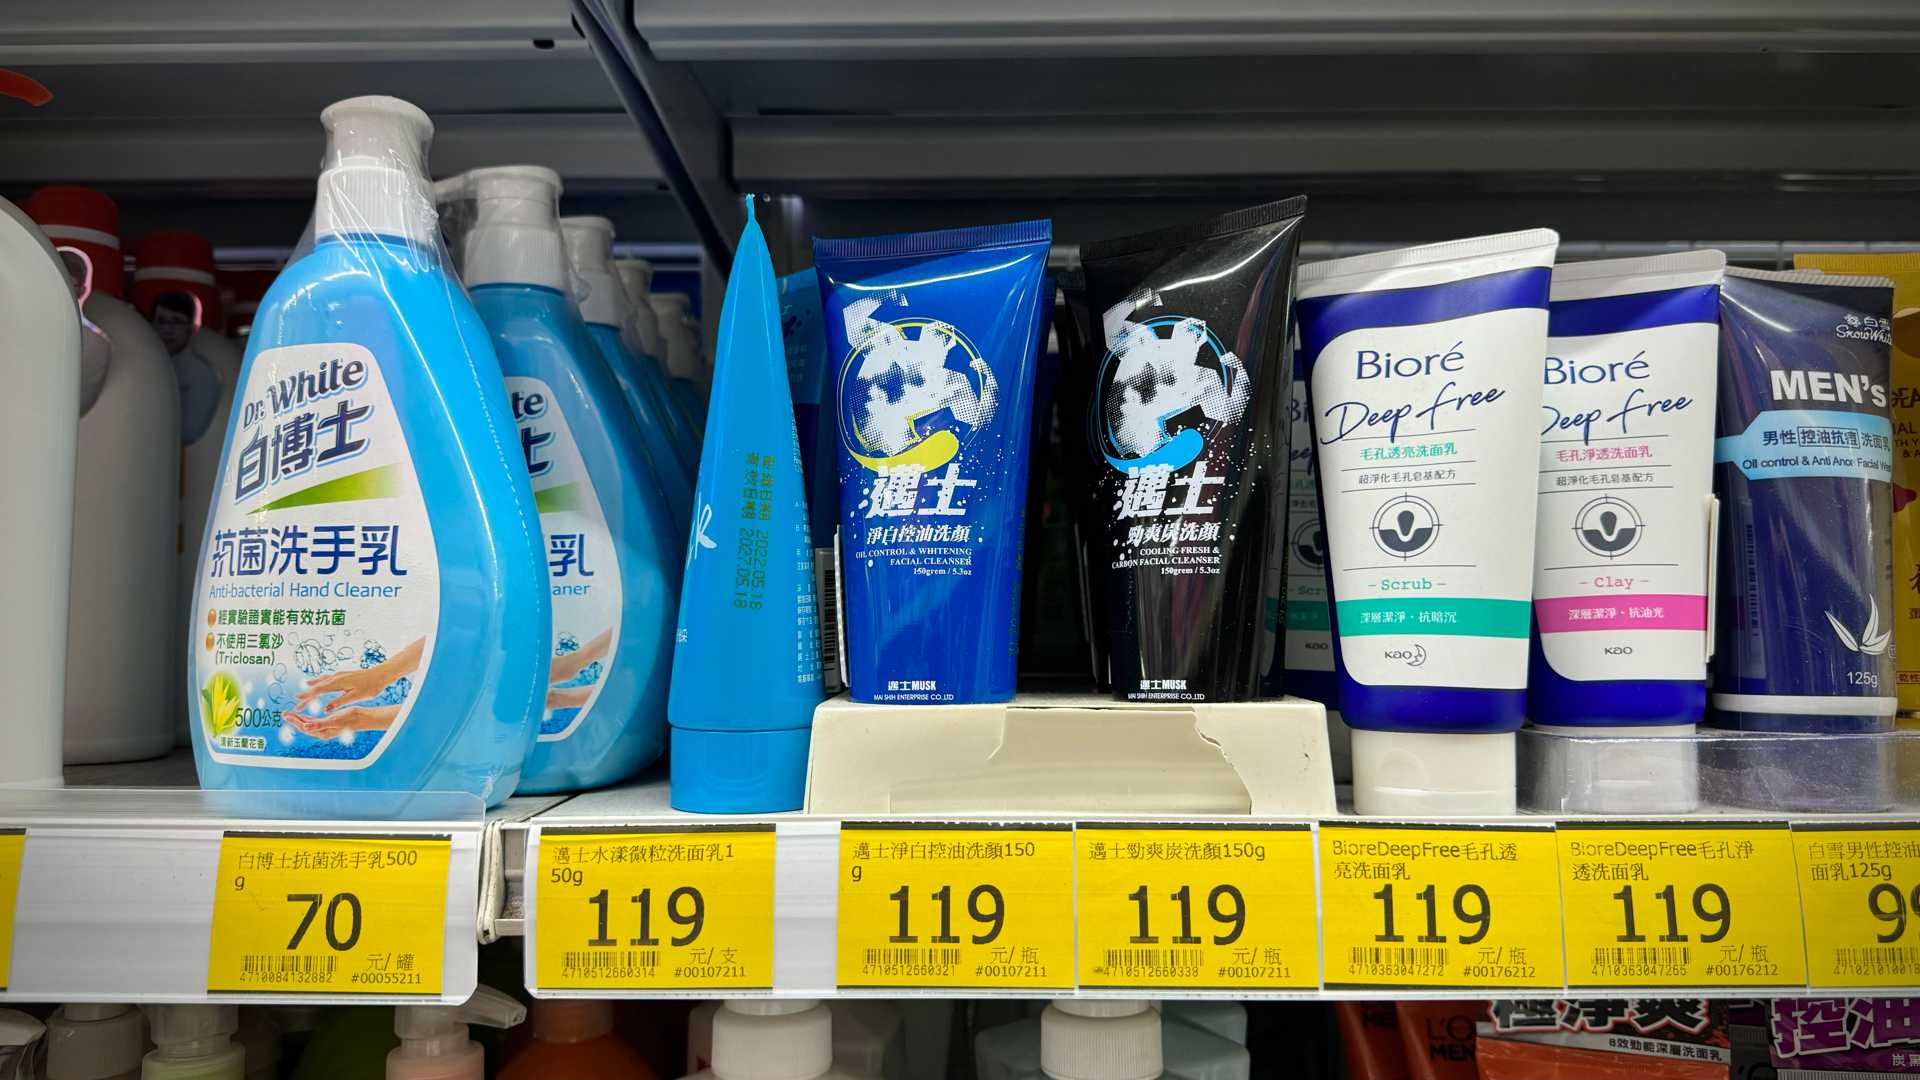 Oil control products on a supermarket shelf.